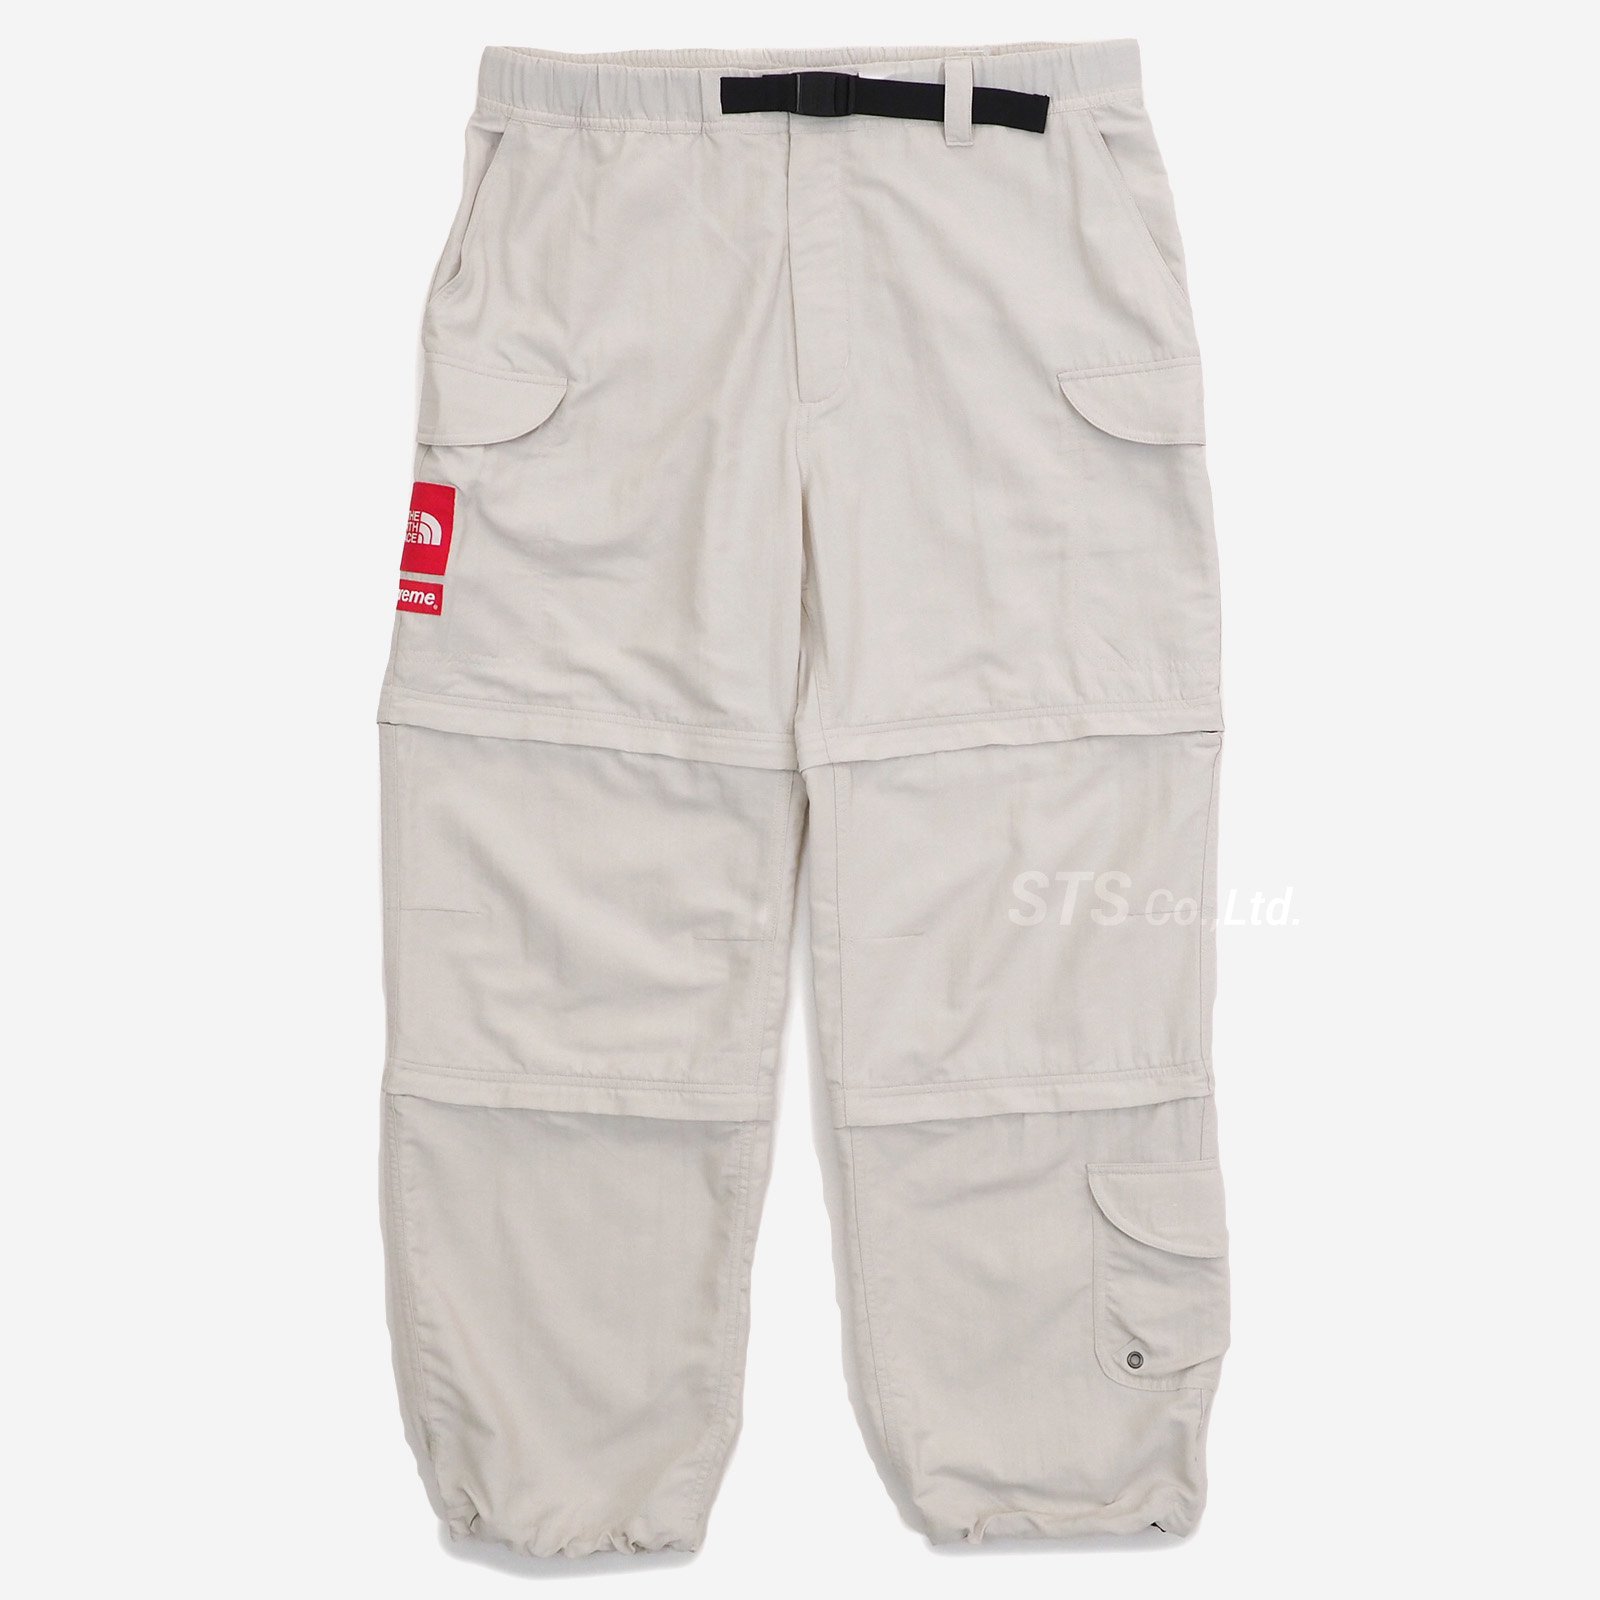 NP02261カラーSupreme The North Face  Trekking pant  S